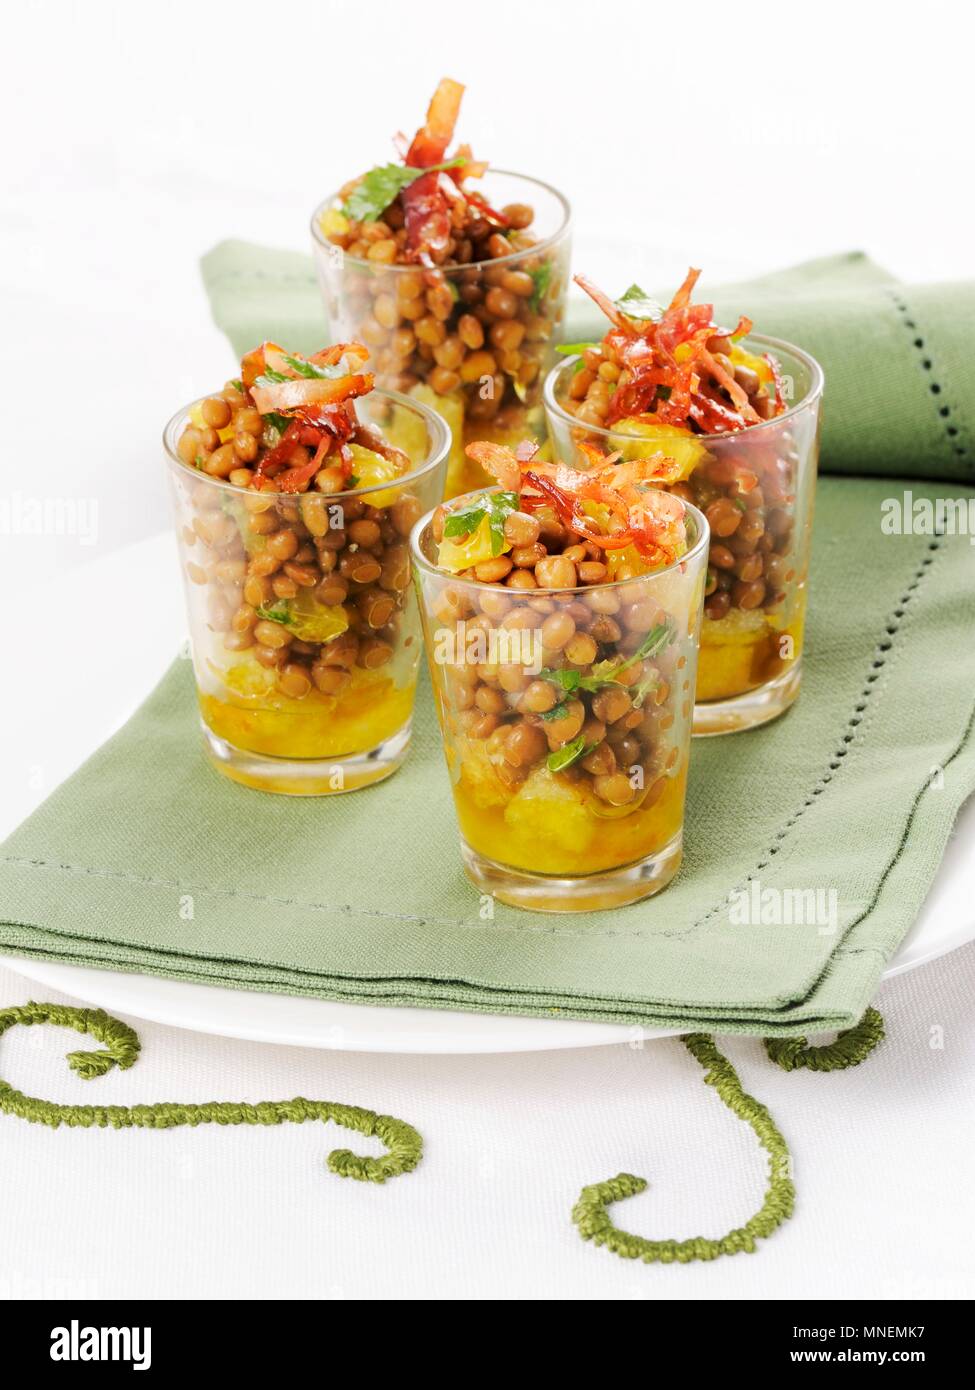 Lentil salad with oranges and strips of ham served in glasses Stock Photo